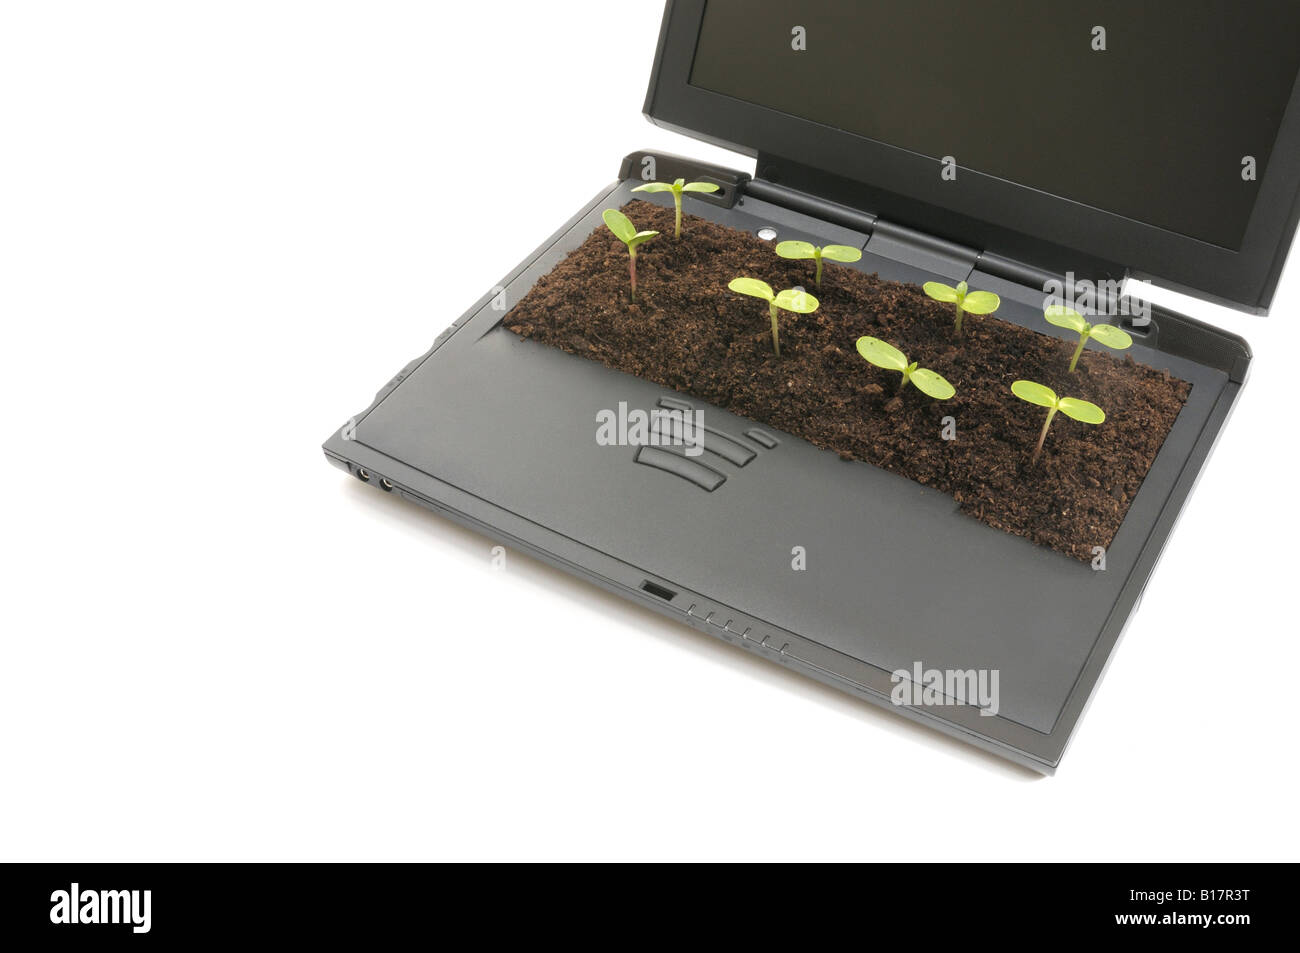 Laptop computer with seedlings growing out of the keyboard Stock Photo